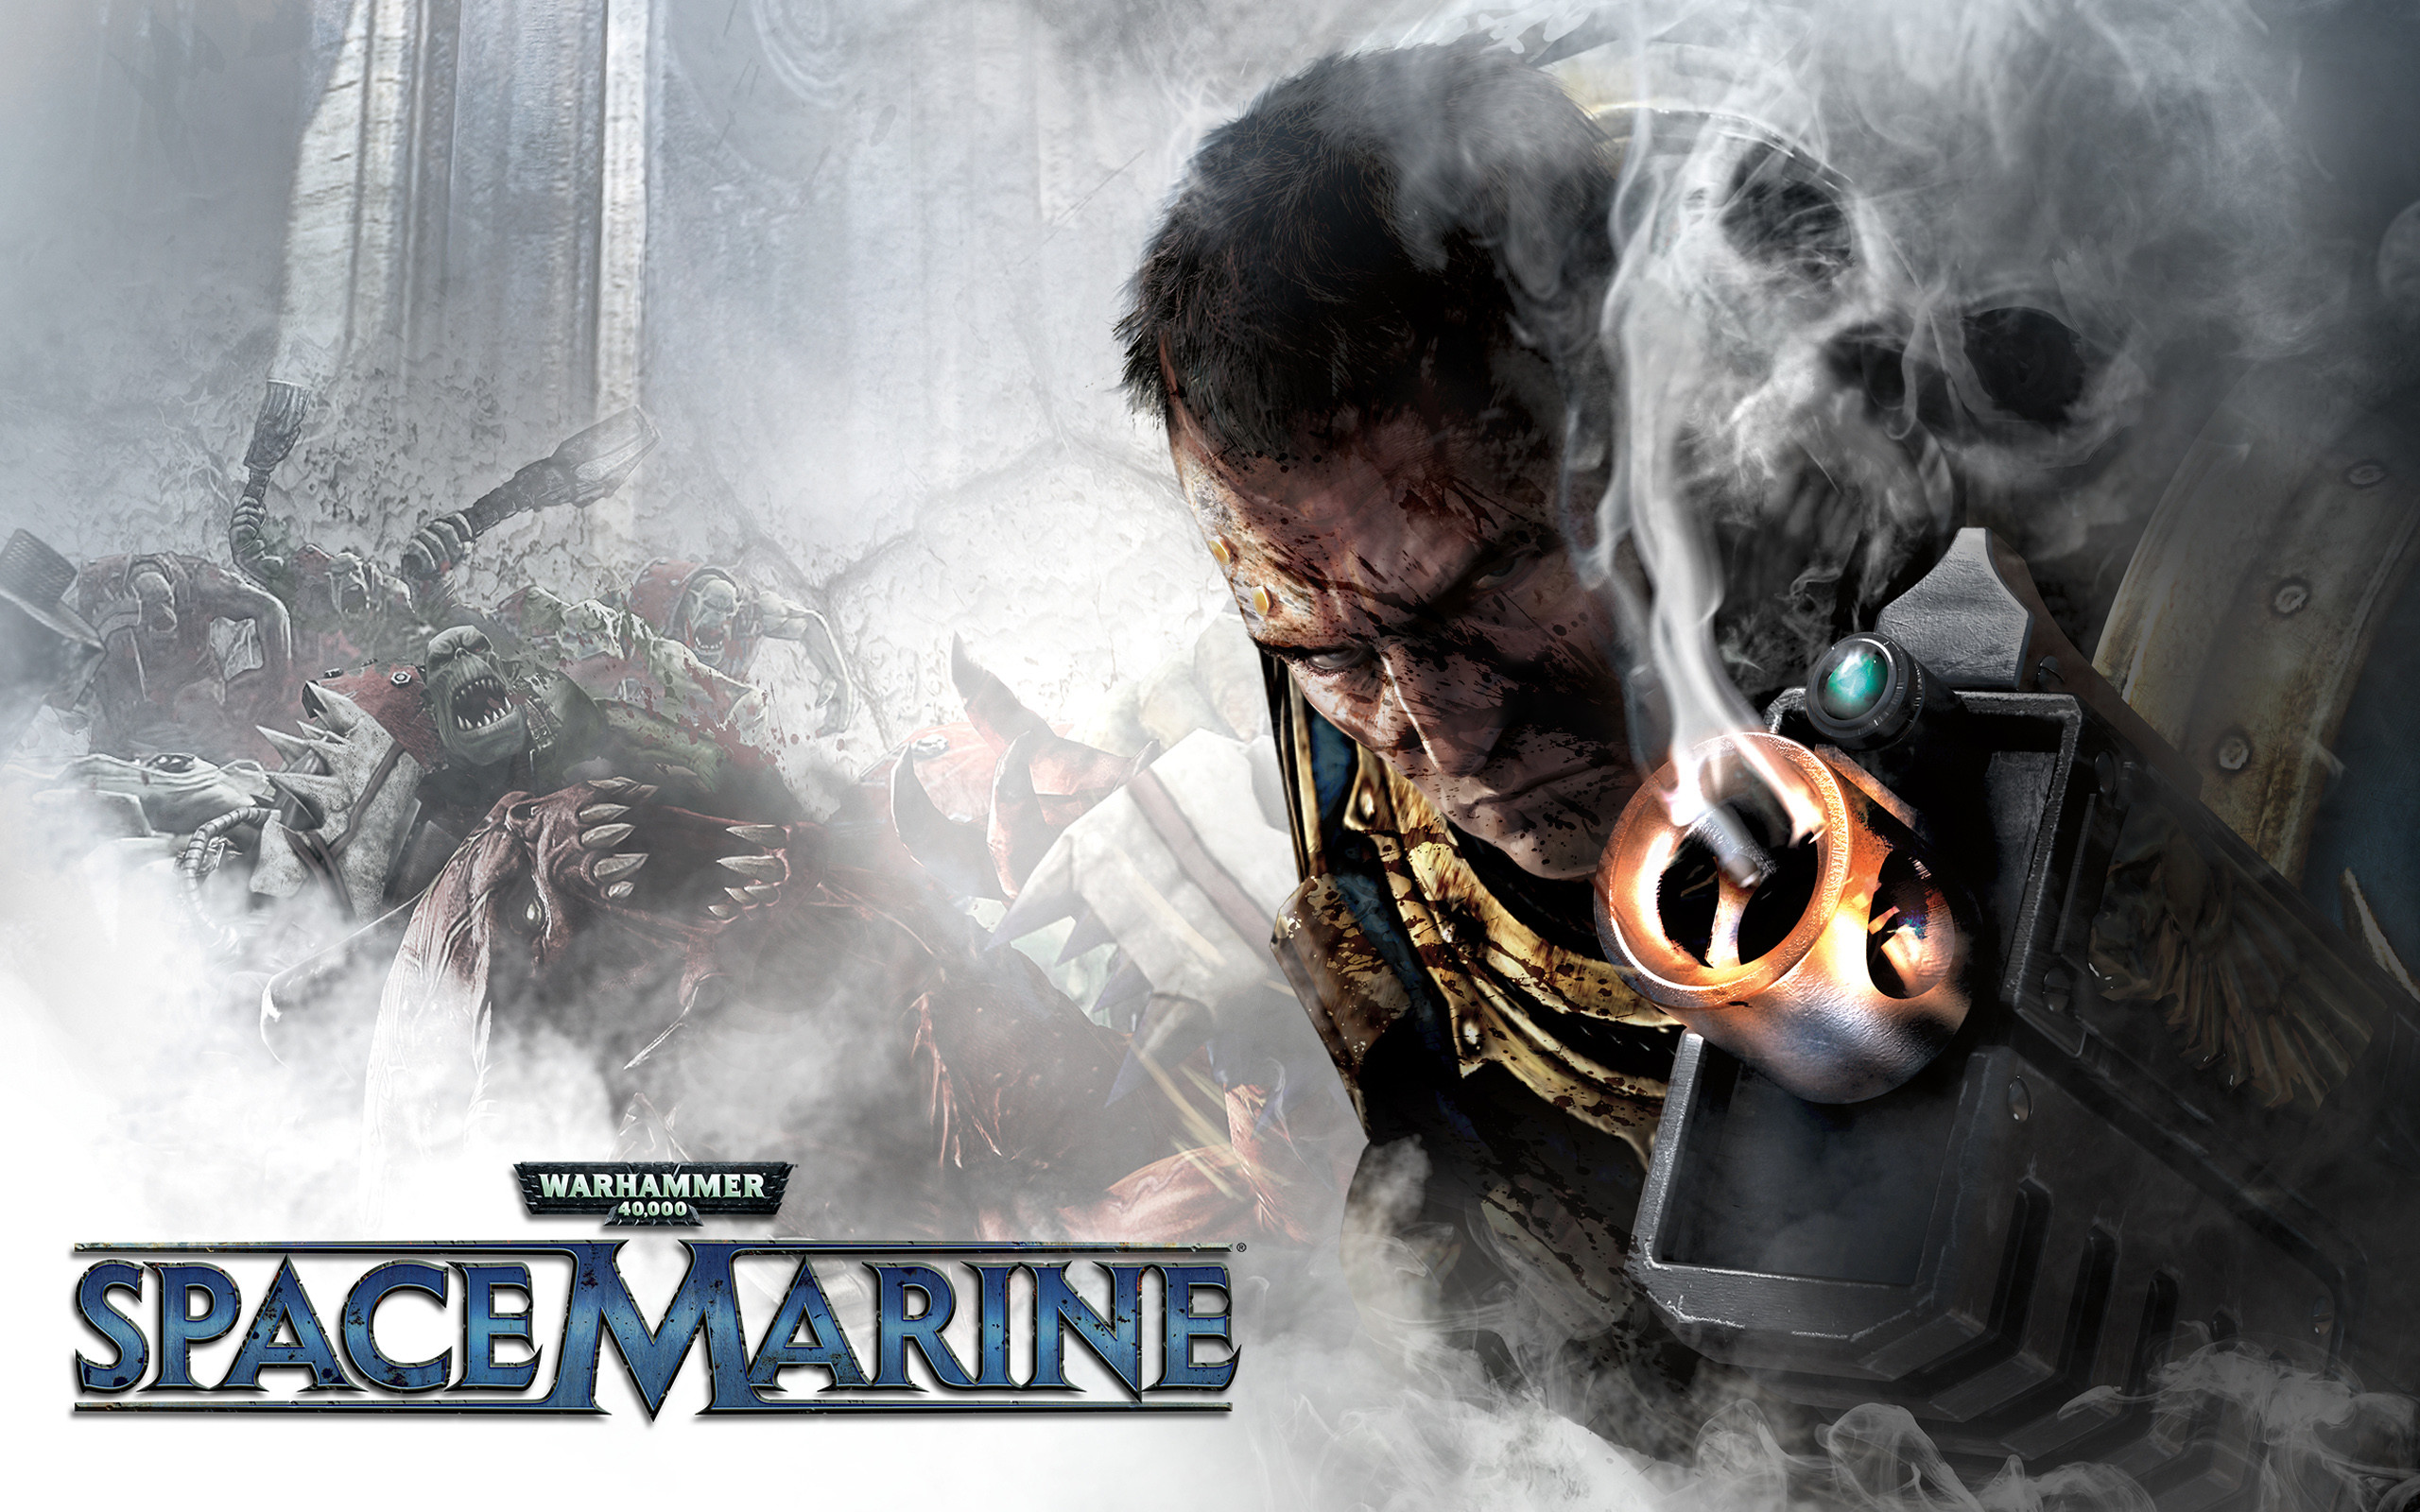 Warhammer Space Marine Game Wallpapers | HD Wallpapers